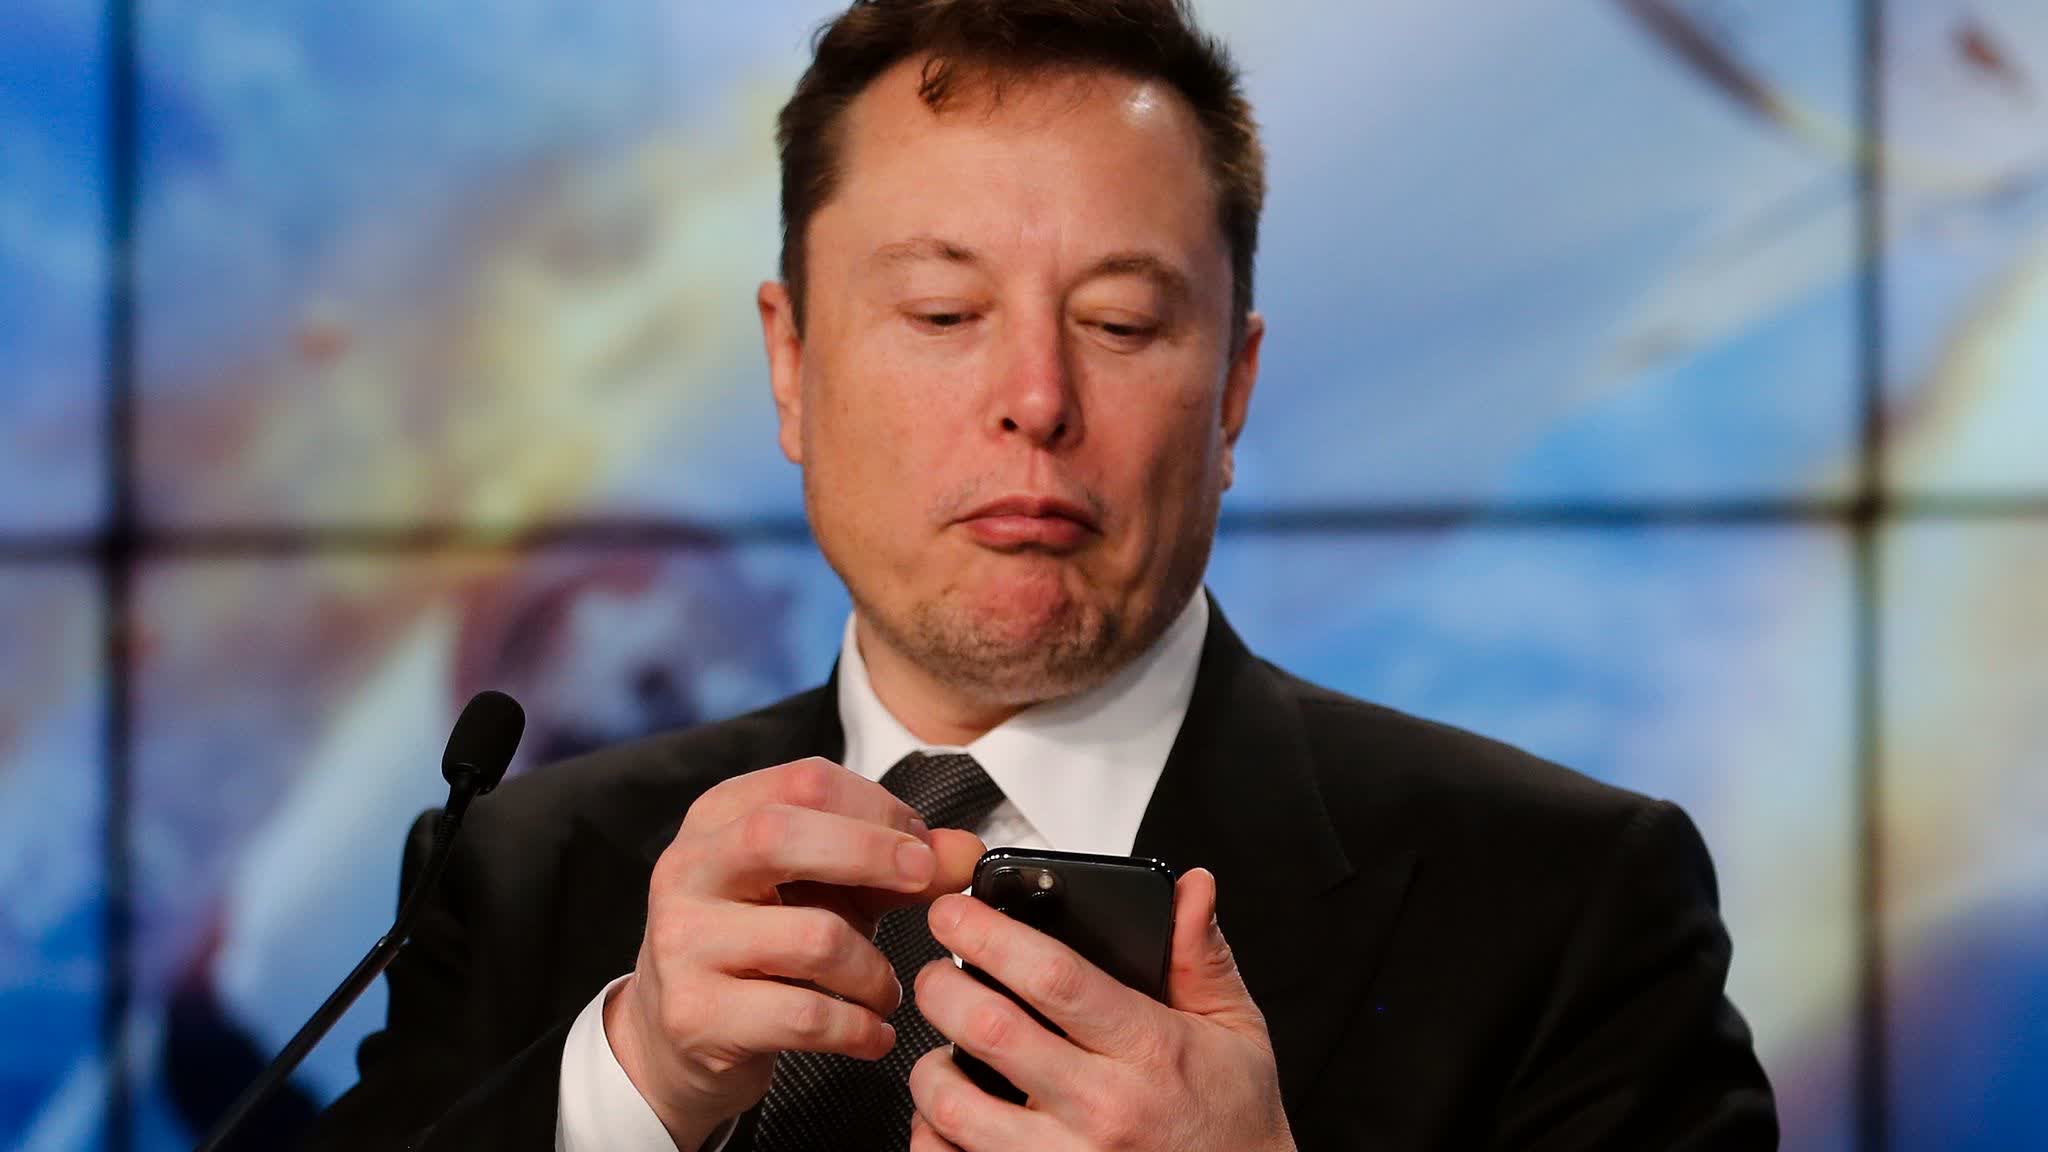 Elon Musk said he would sell Tesla stock 'right now' if UN could show how $6B could solve world hunger